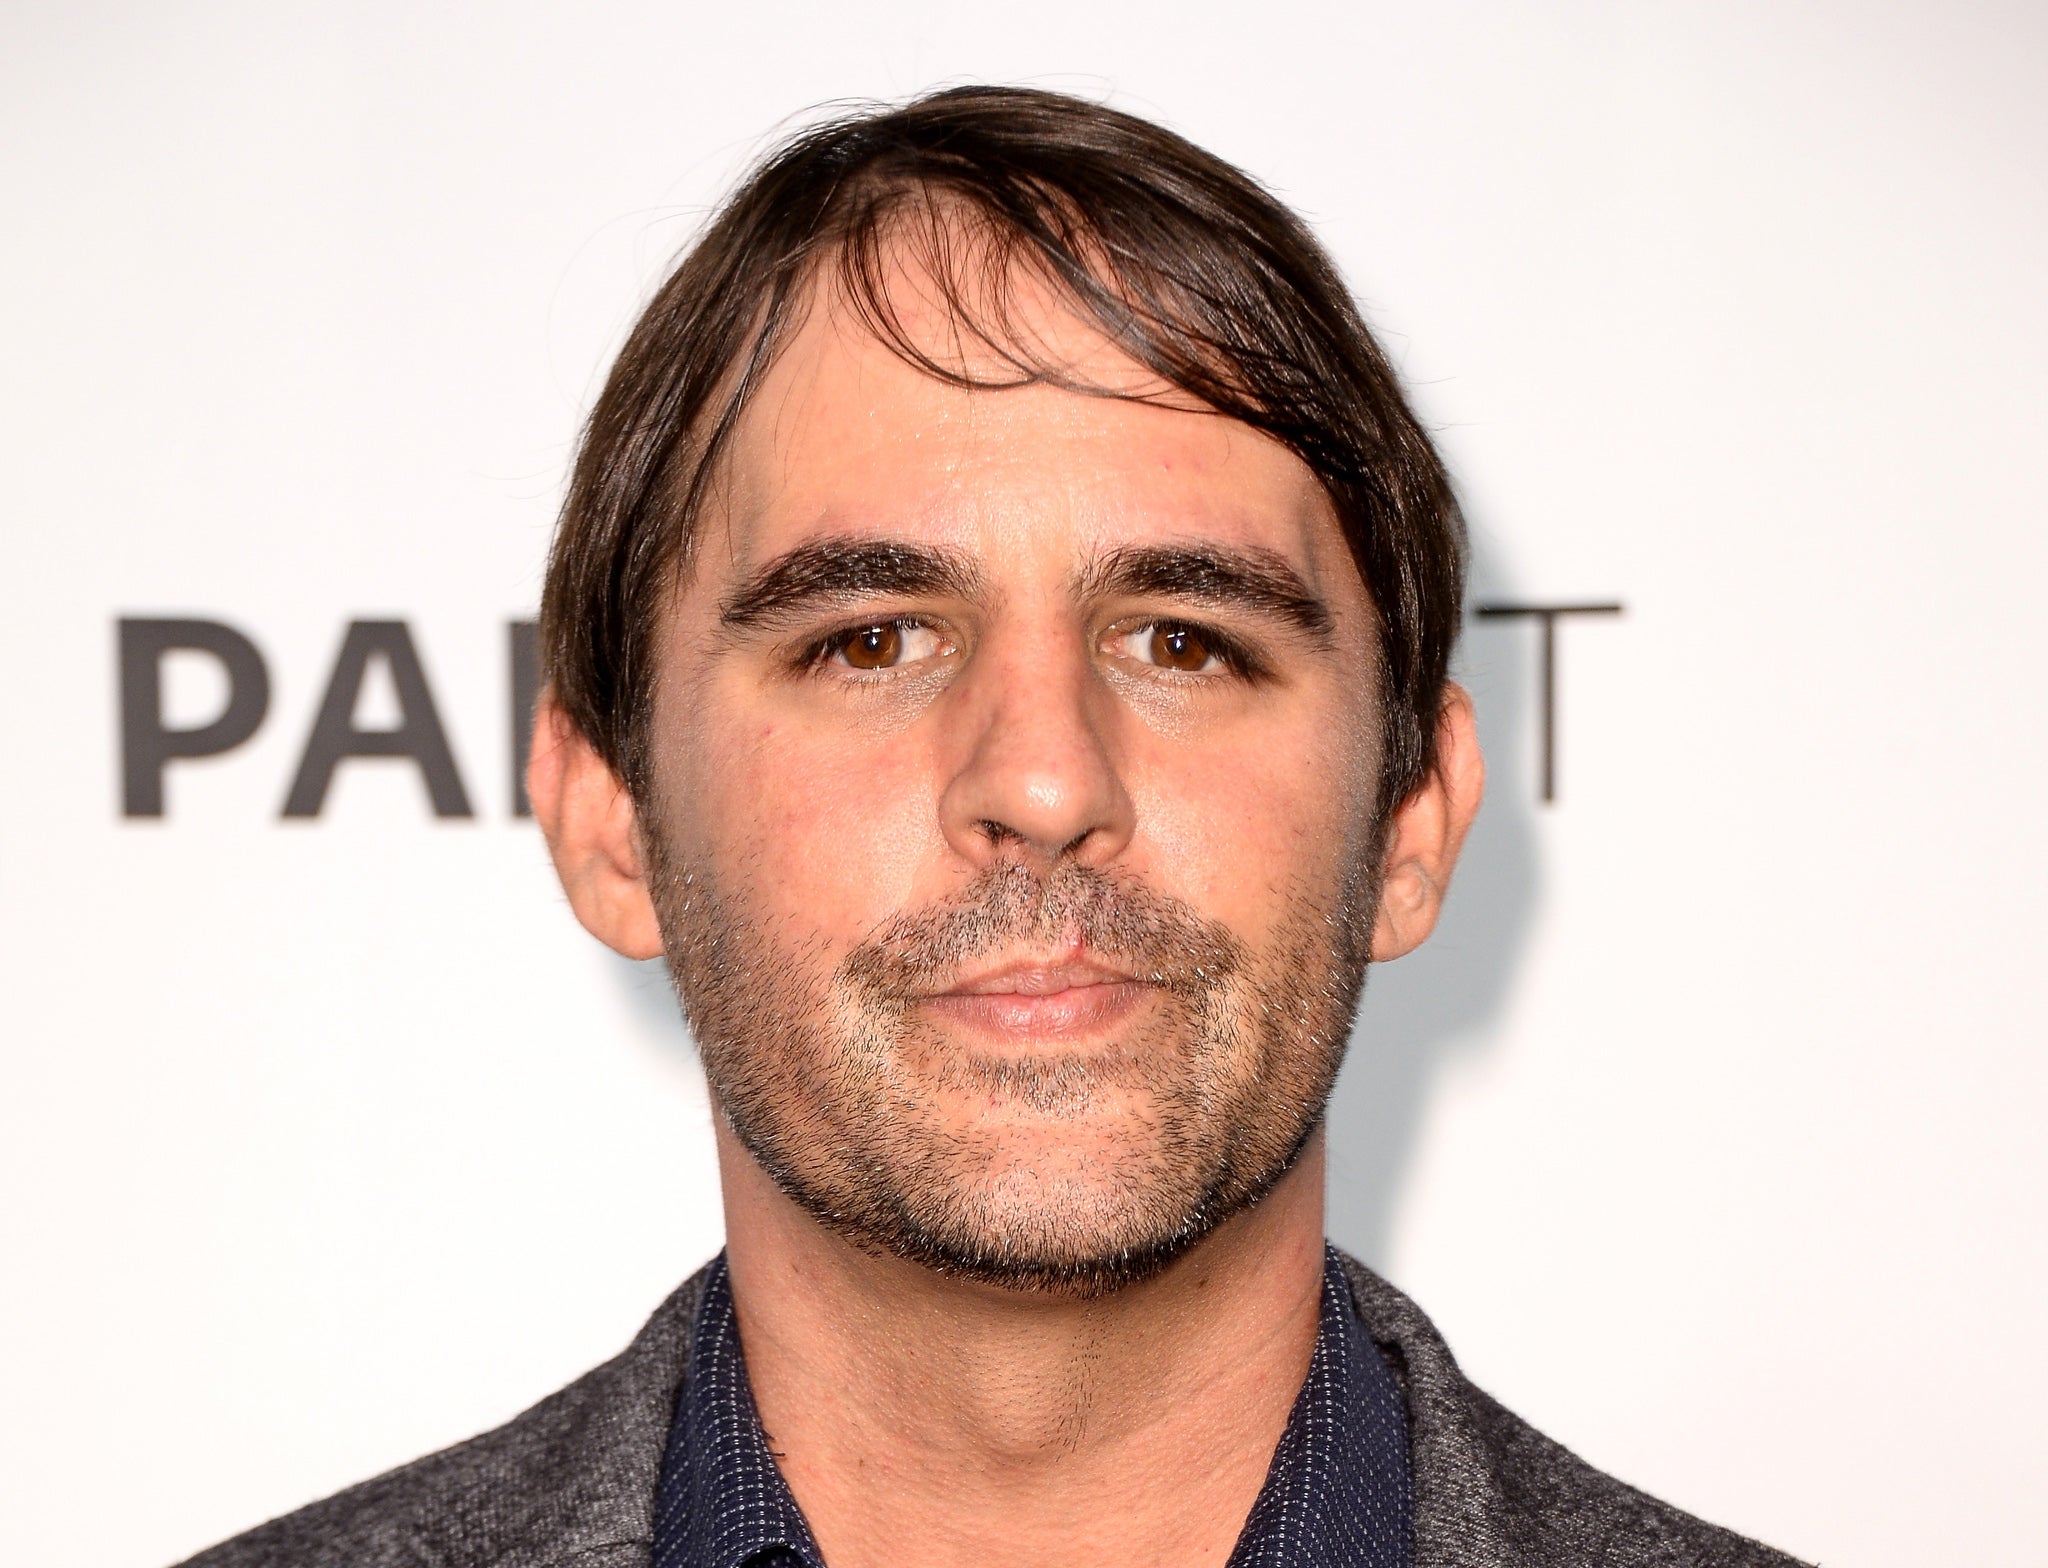 Roberto Orci is due to direct Star Trek 3